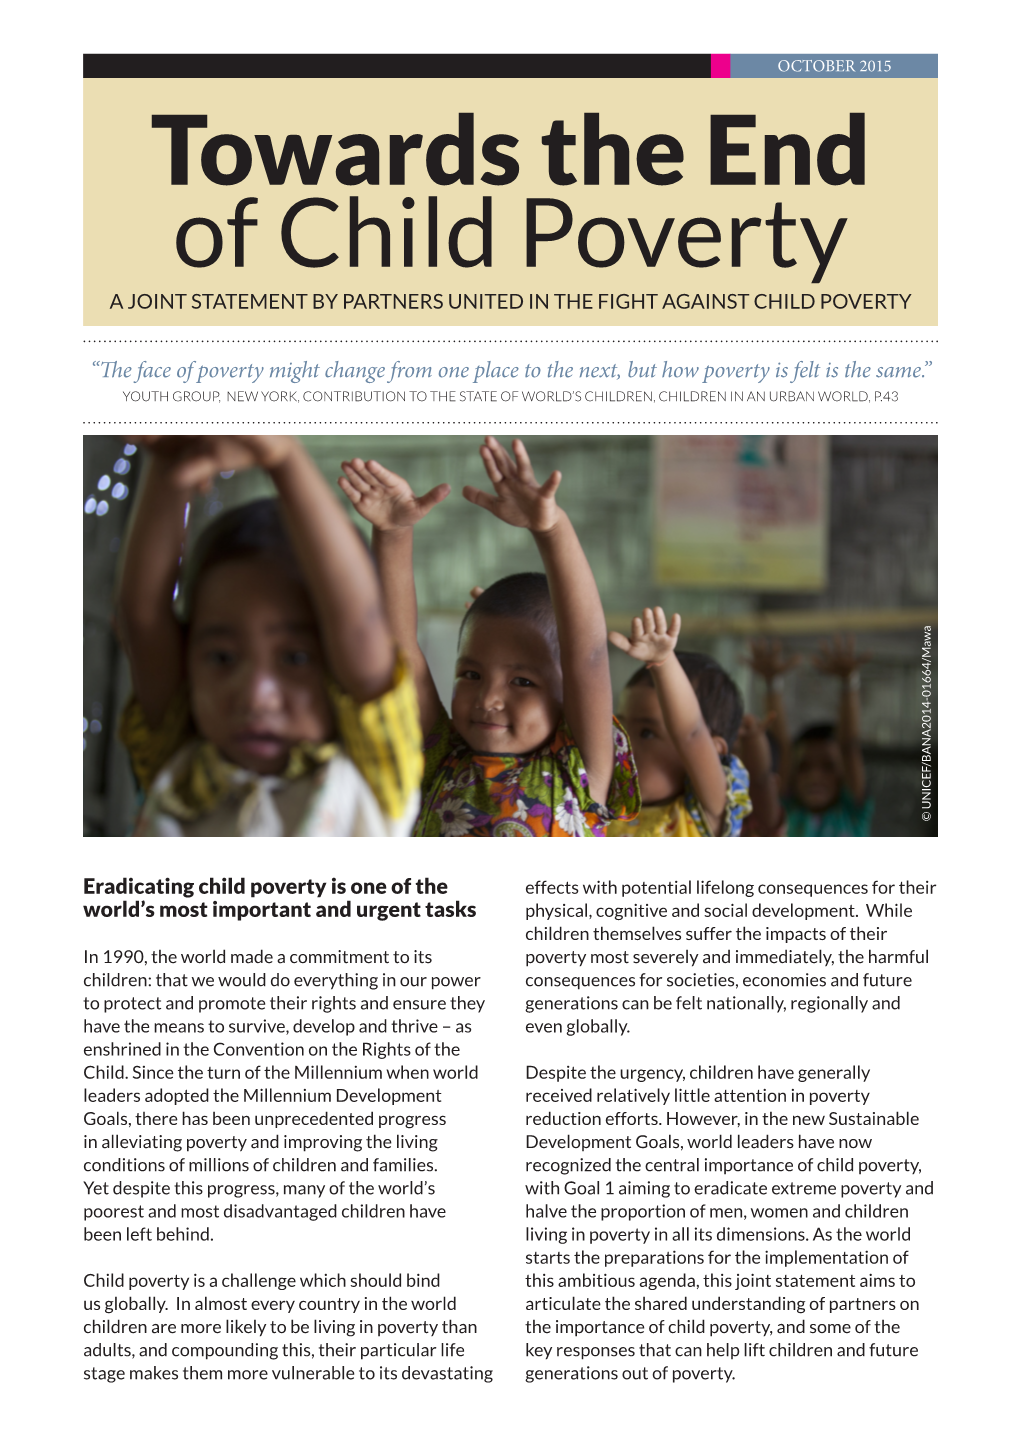 Towards the End of Child Poverty a JOINT STATEMENT by PARTNERS UNITED in the FIGHT AGAINST CHILD POVERTY